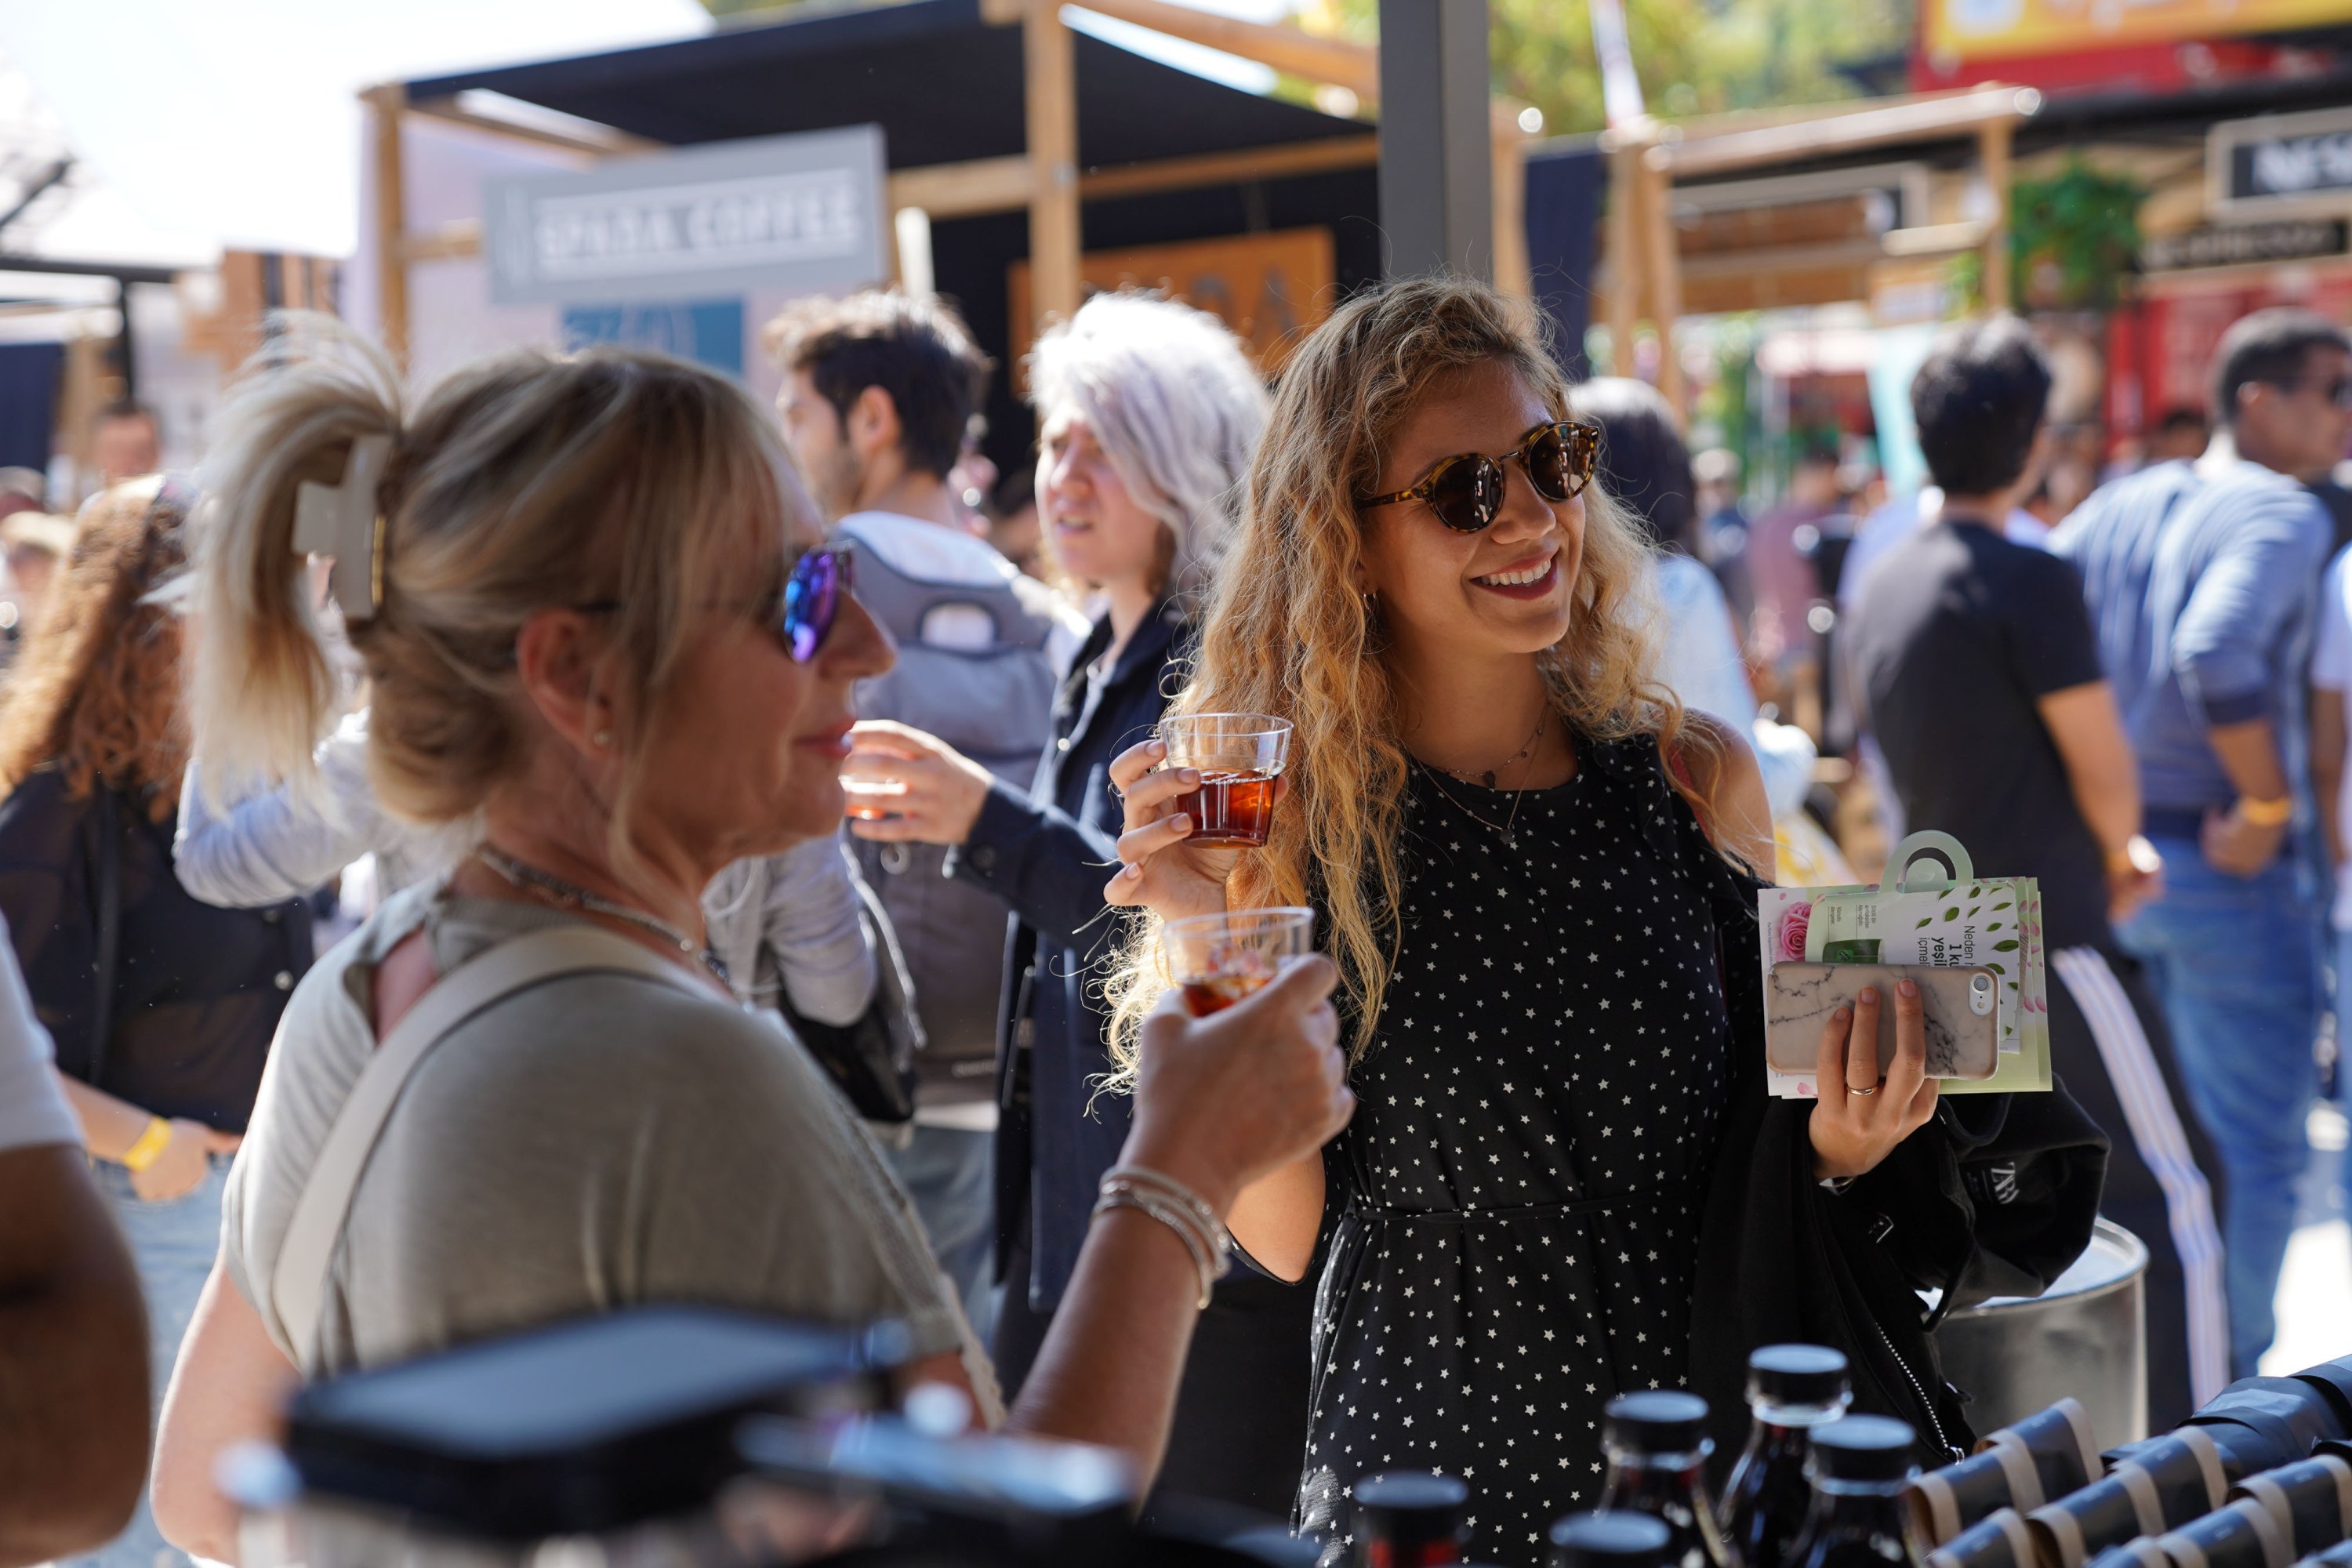 Coffee lovers are having fun at the festival, Sept. 29, 2019. (Photo courtesy of the organization)